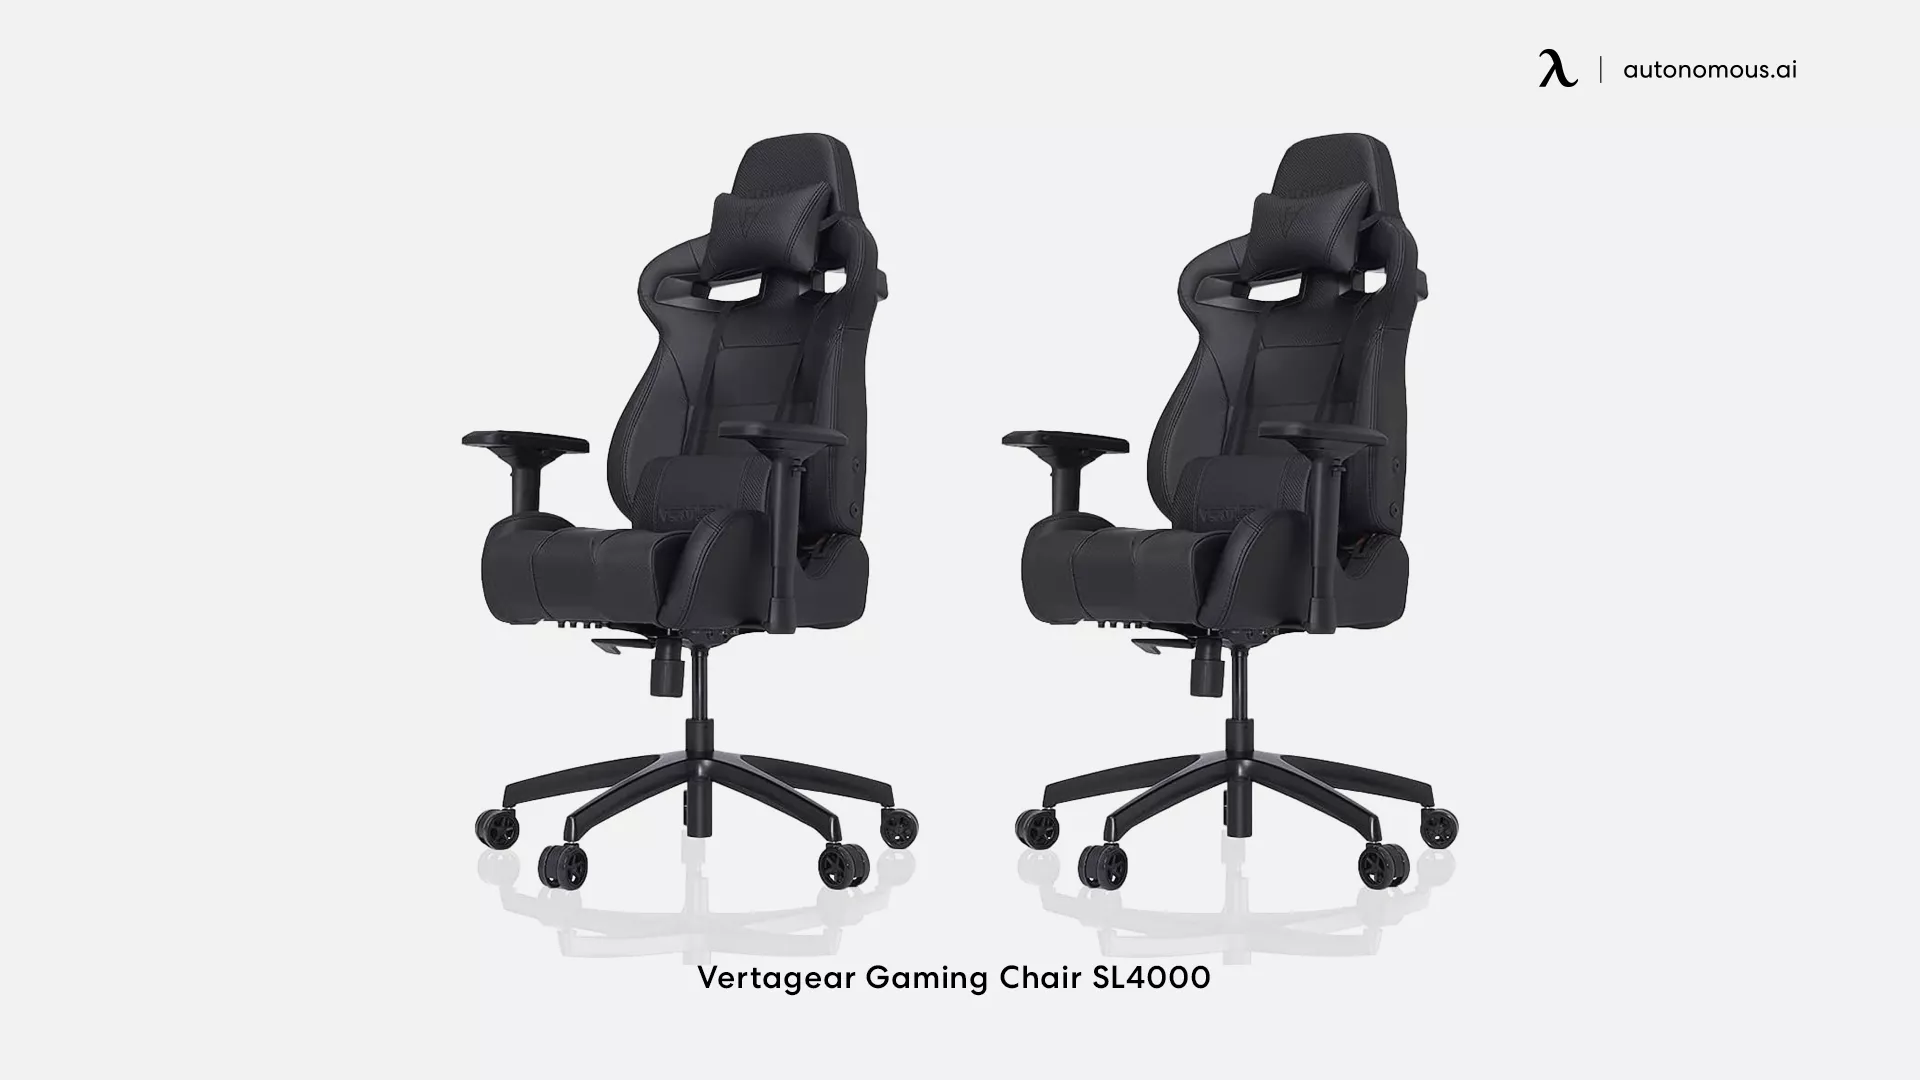 Vertagear SL4000 gaming chair for living room